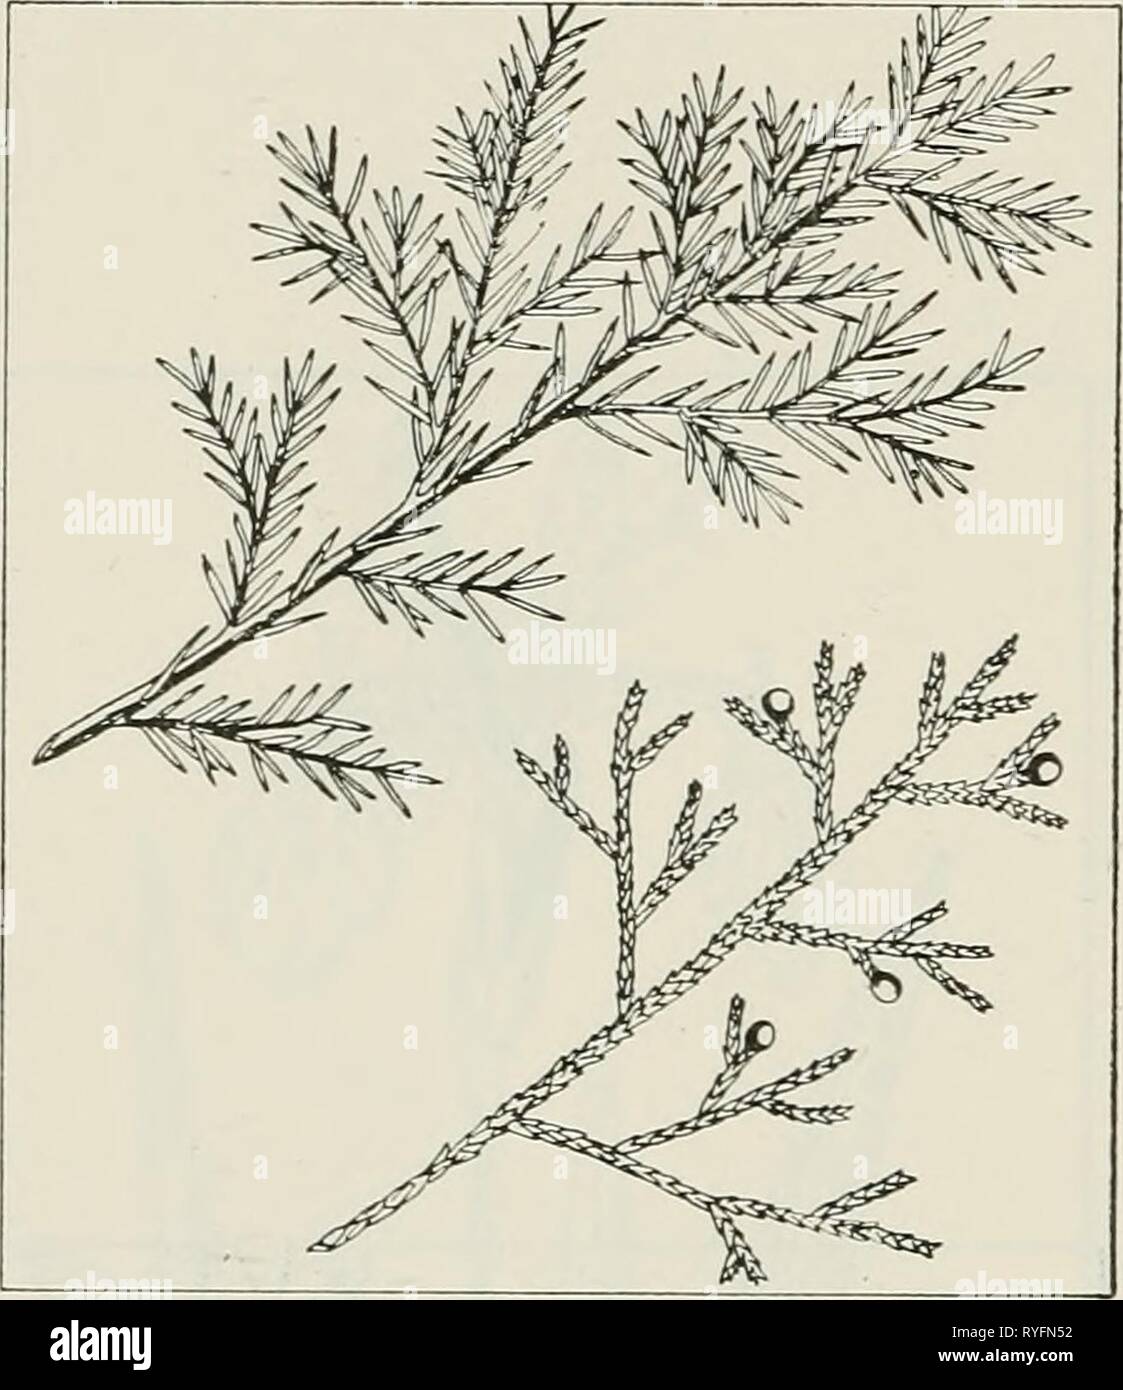 The drug plants of Illinois  drugplantsofilli44teho Year: 1951  JUNIPERUS COMMUNIS L. Com- mon juniper, hackmatack, horse savin, gorst. Pinaceae. U. S. P. XI, p. 256.— A low and spreading or upright, small shrub or tree, evergreen; bark of the trunk shreddy; foliage in the form of needles, the needles straight, rigid, sharp-pointed, up to ]/i inch long; flowers lacking, cones present instead; fruit blue, glaucous, berry- like, 14 inch in diameter, 3-seeded. The fruit collected in fall and winter, when ripe. In cultivation as an ornamen- tal; established near Lake Michigan in Lake County. Conta Stock Photo